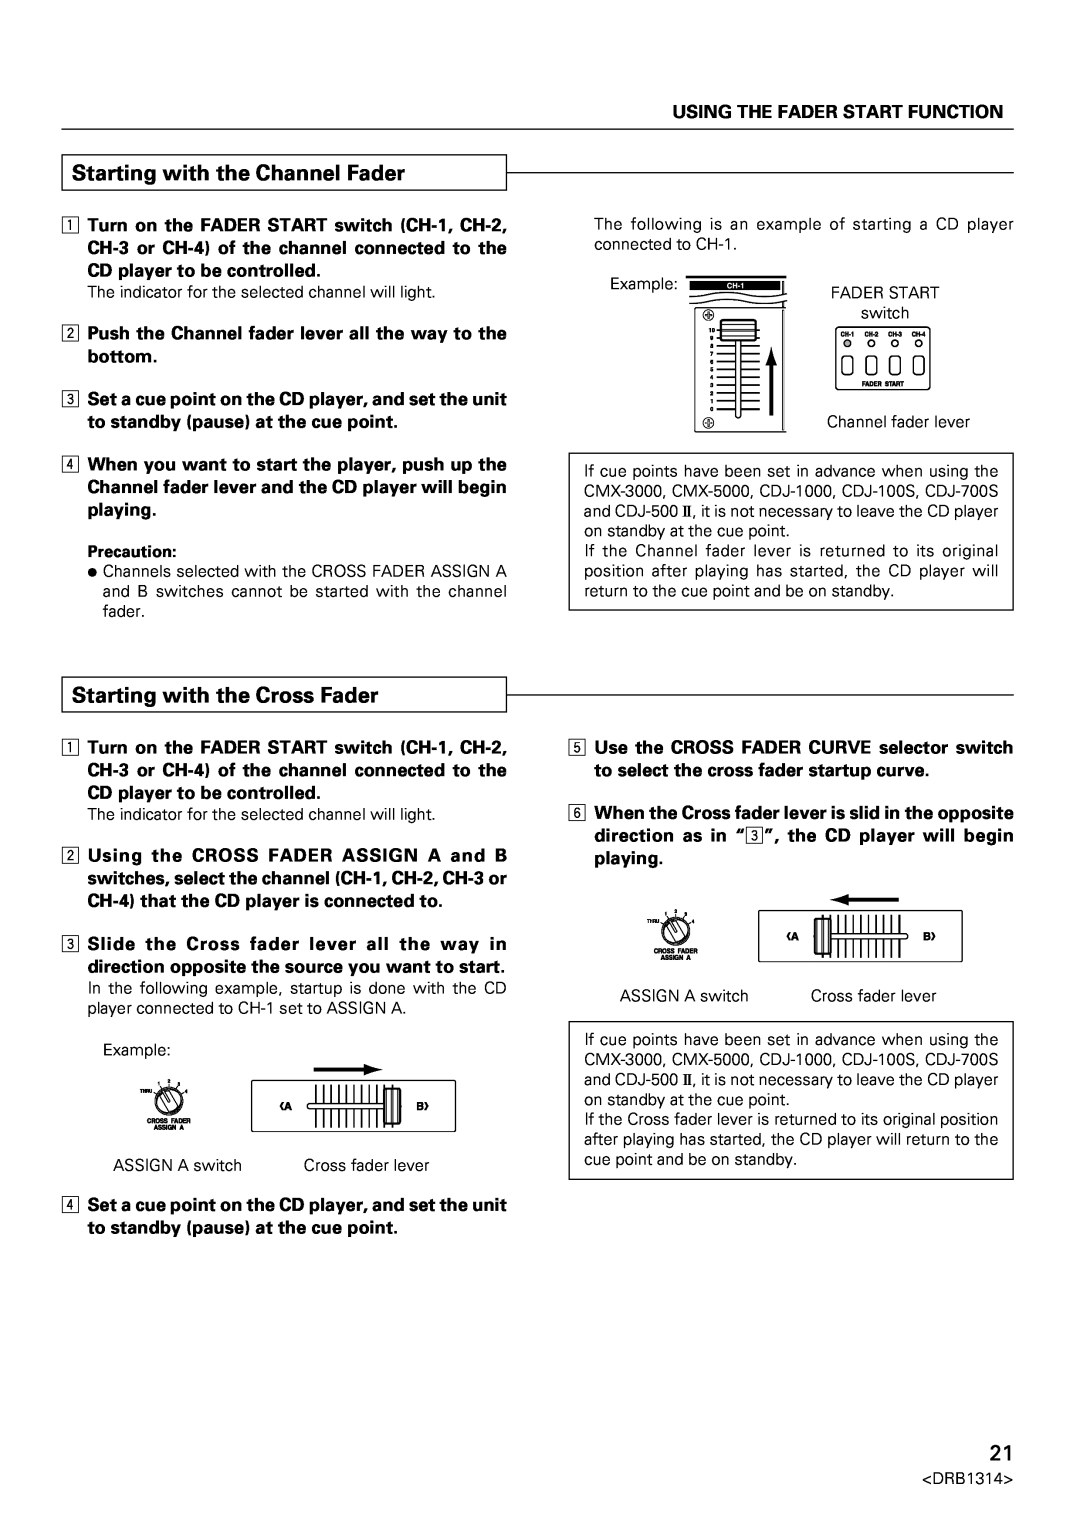 Plantronics DJM-3000 operating instructions Starting with the Channel Fader, Starting with the Cross Fader, Precaution 